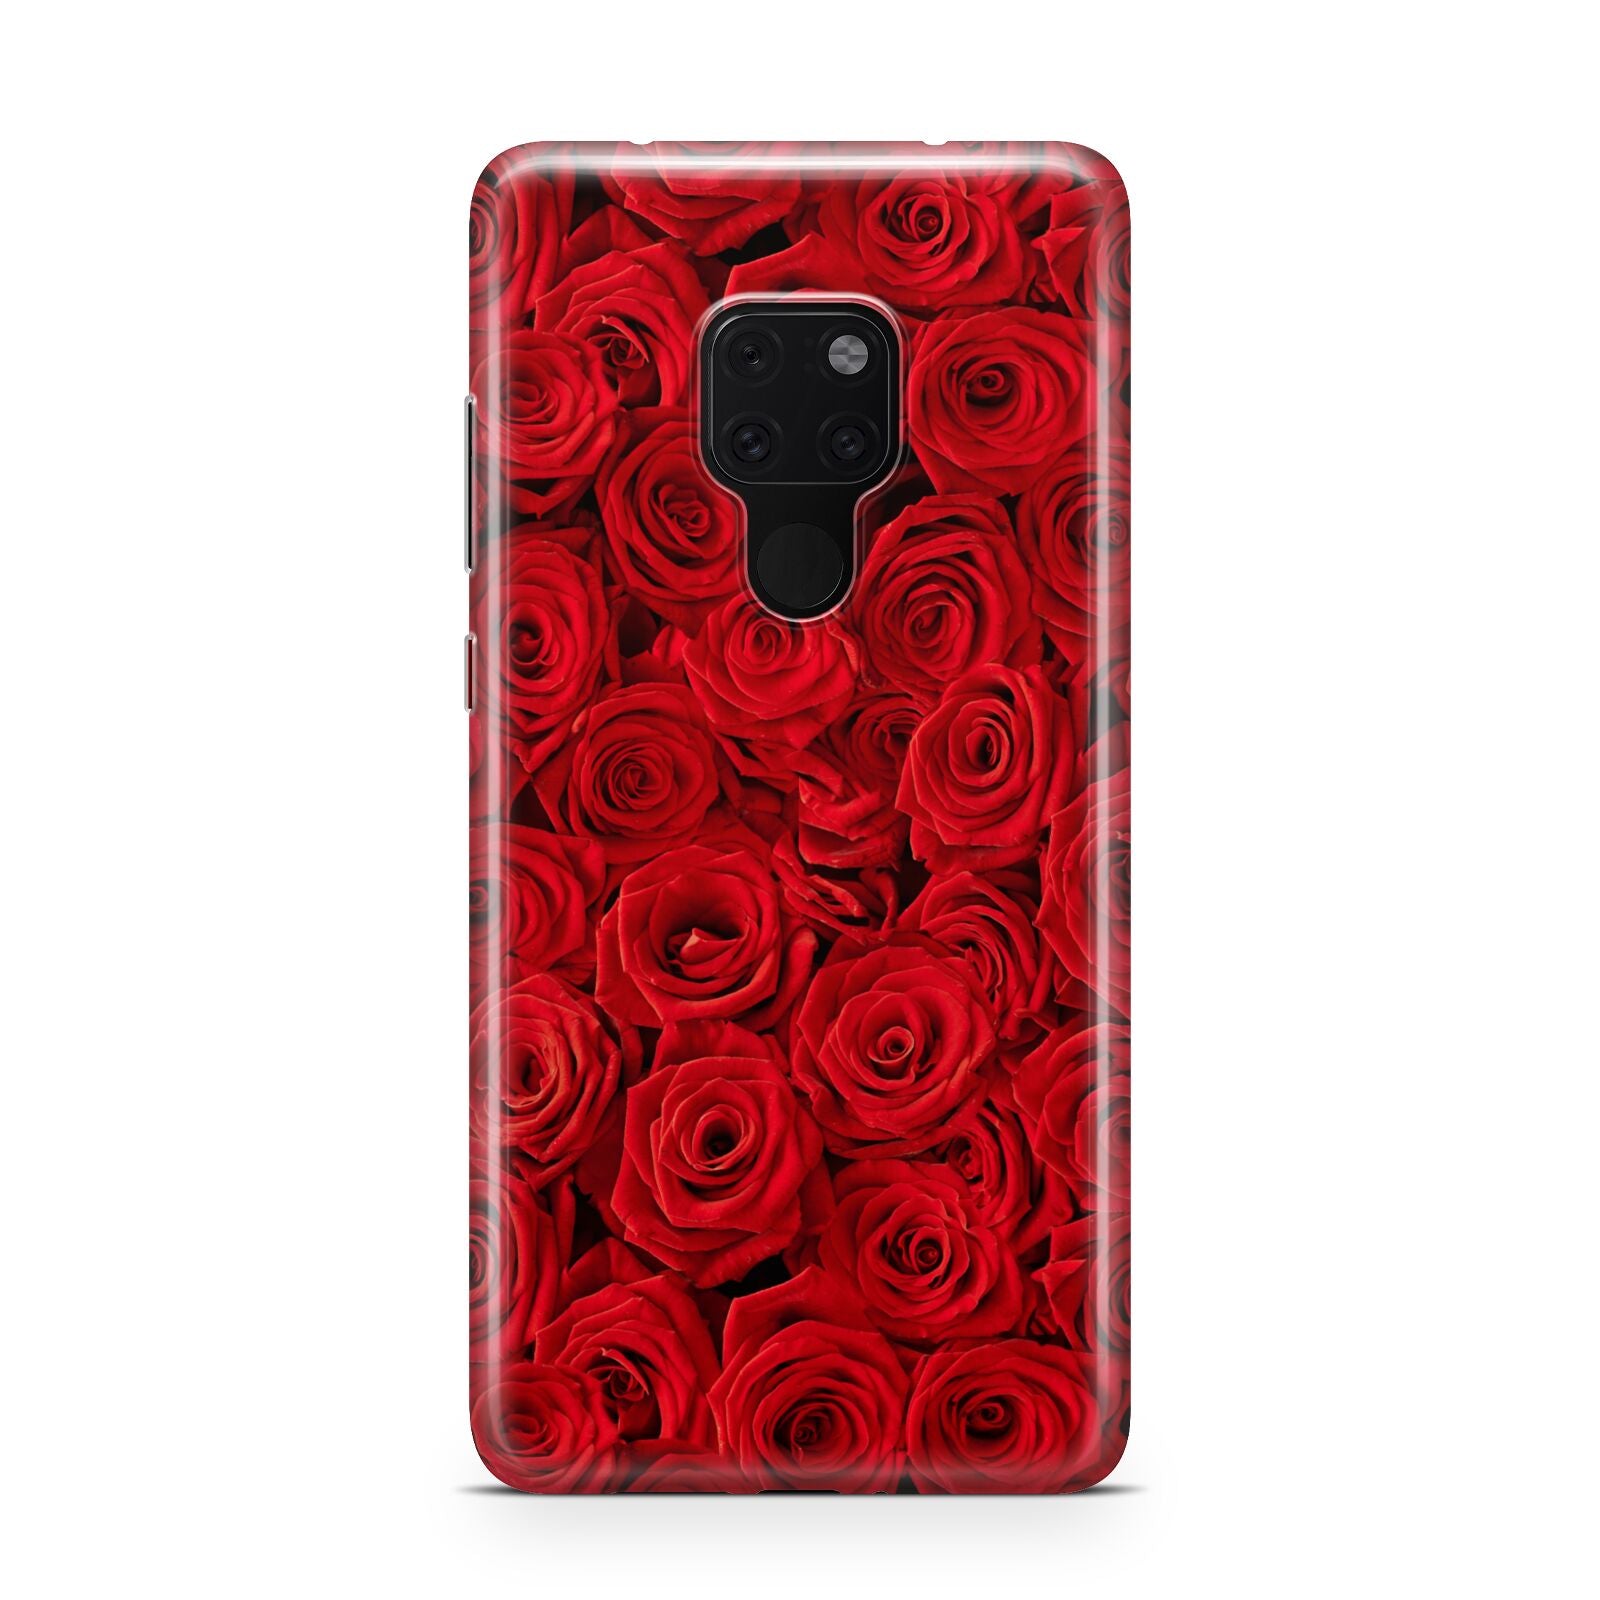 test THNG23 342 Huawei Mate 20 Phone Case